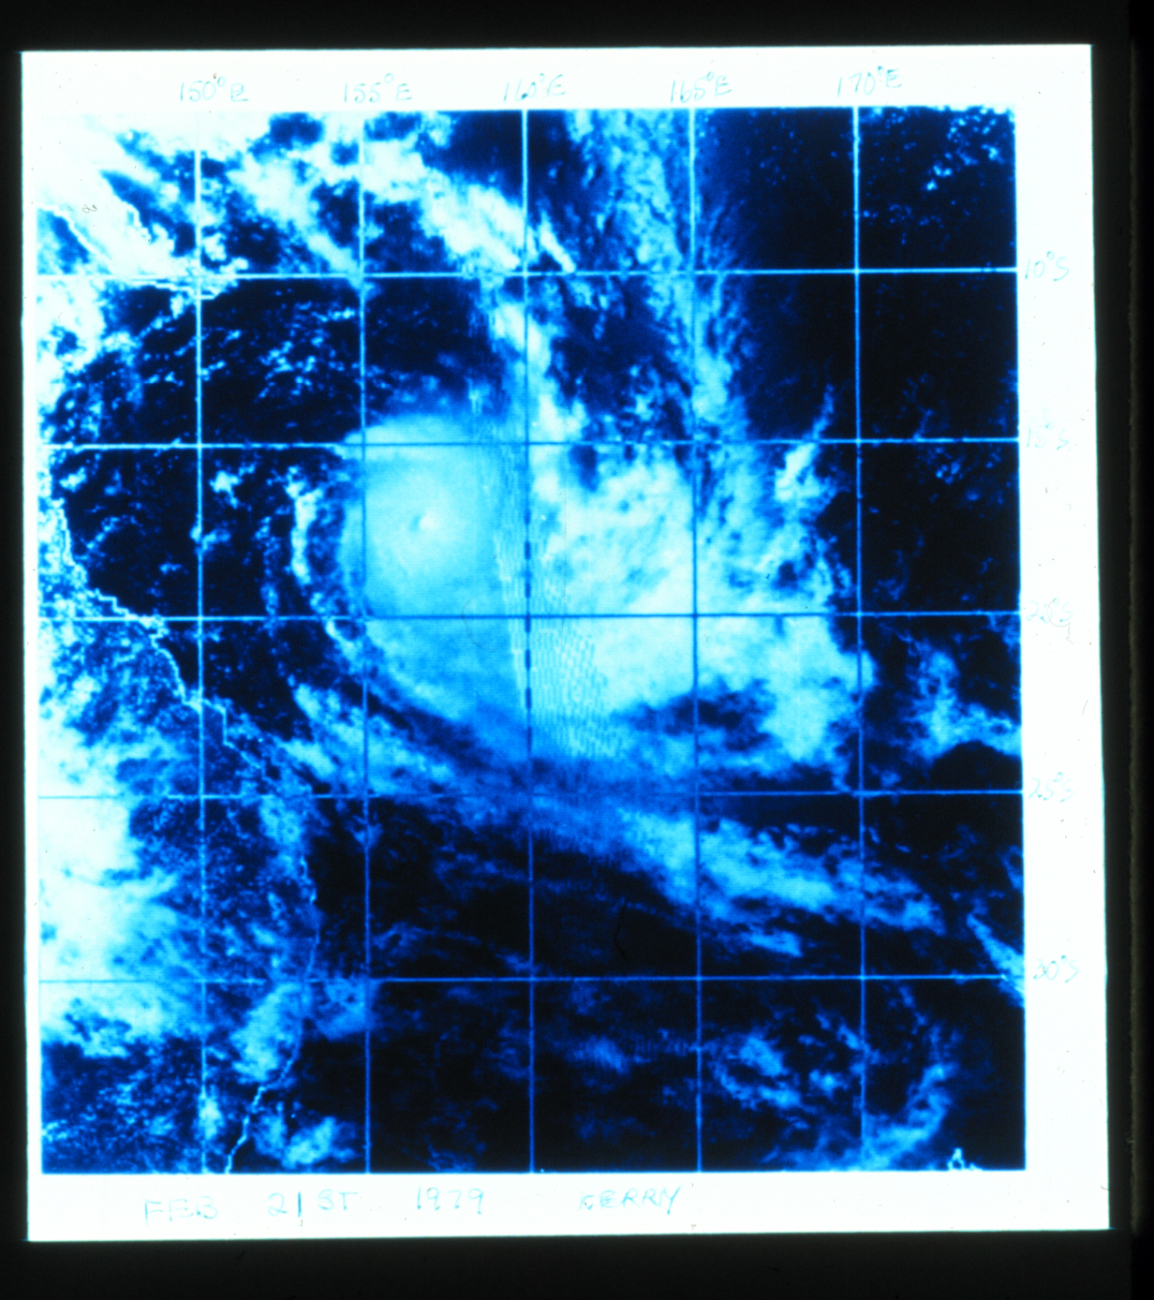 Typhoon Kerry in Coral Sea